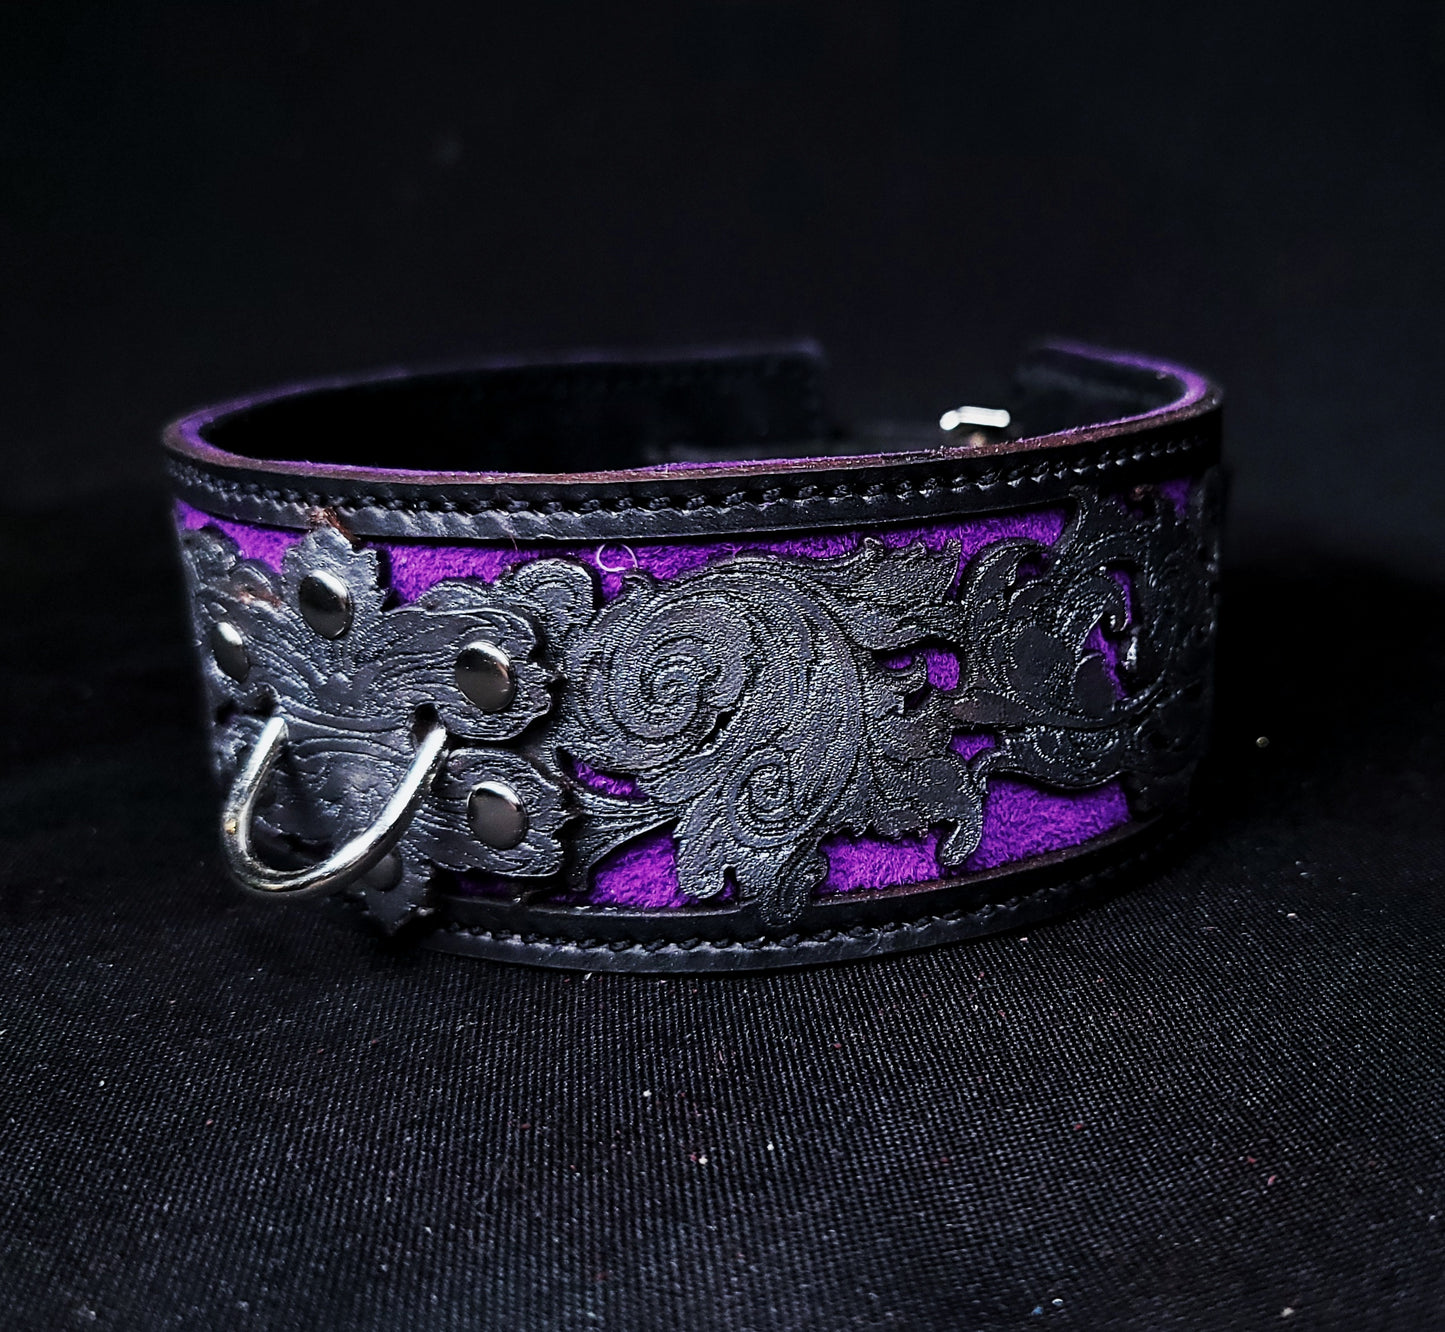 Venice on Fire Band Collar in Purple- In Stock